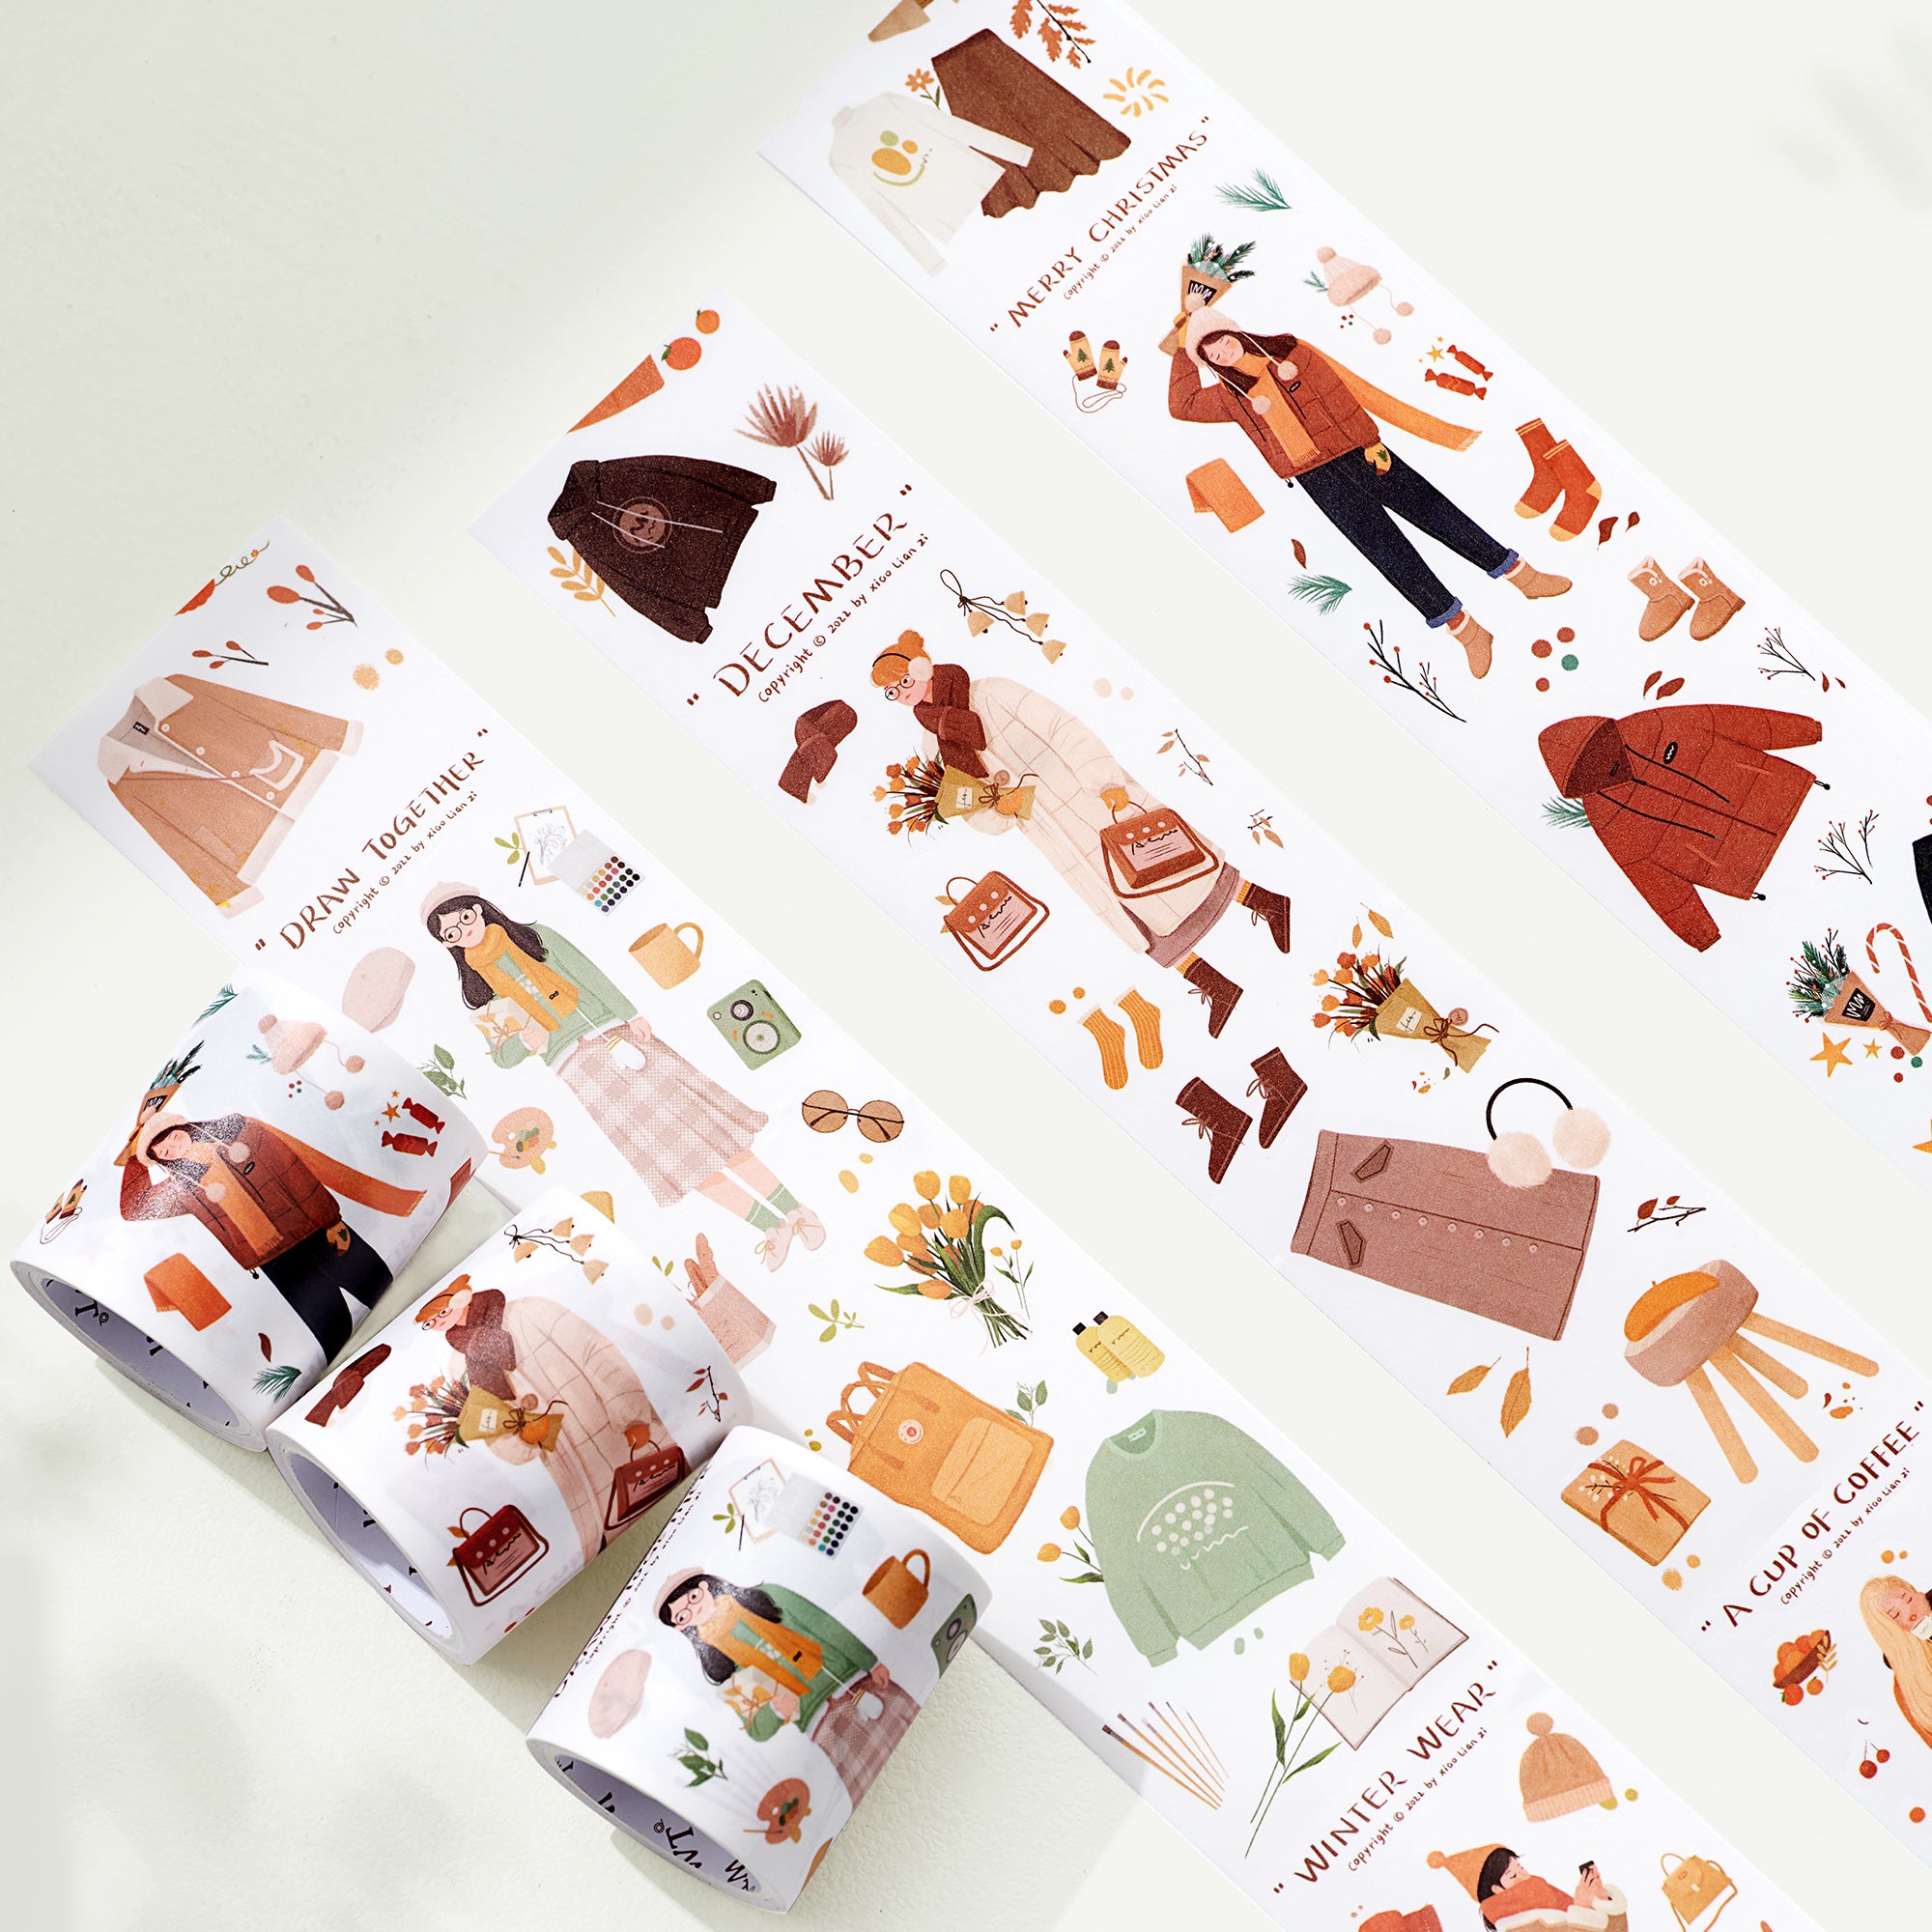 Winter Impression Wide Washi Tape Sticker Set | The Washi Tape Shop. Beautiful Washi and Decorative Tape For Bullet Journals, Gift Wrapping, Planner Decoration and DIY Projects